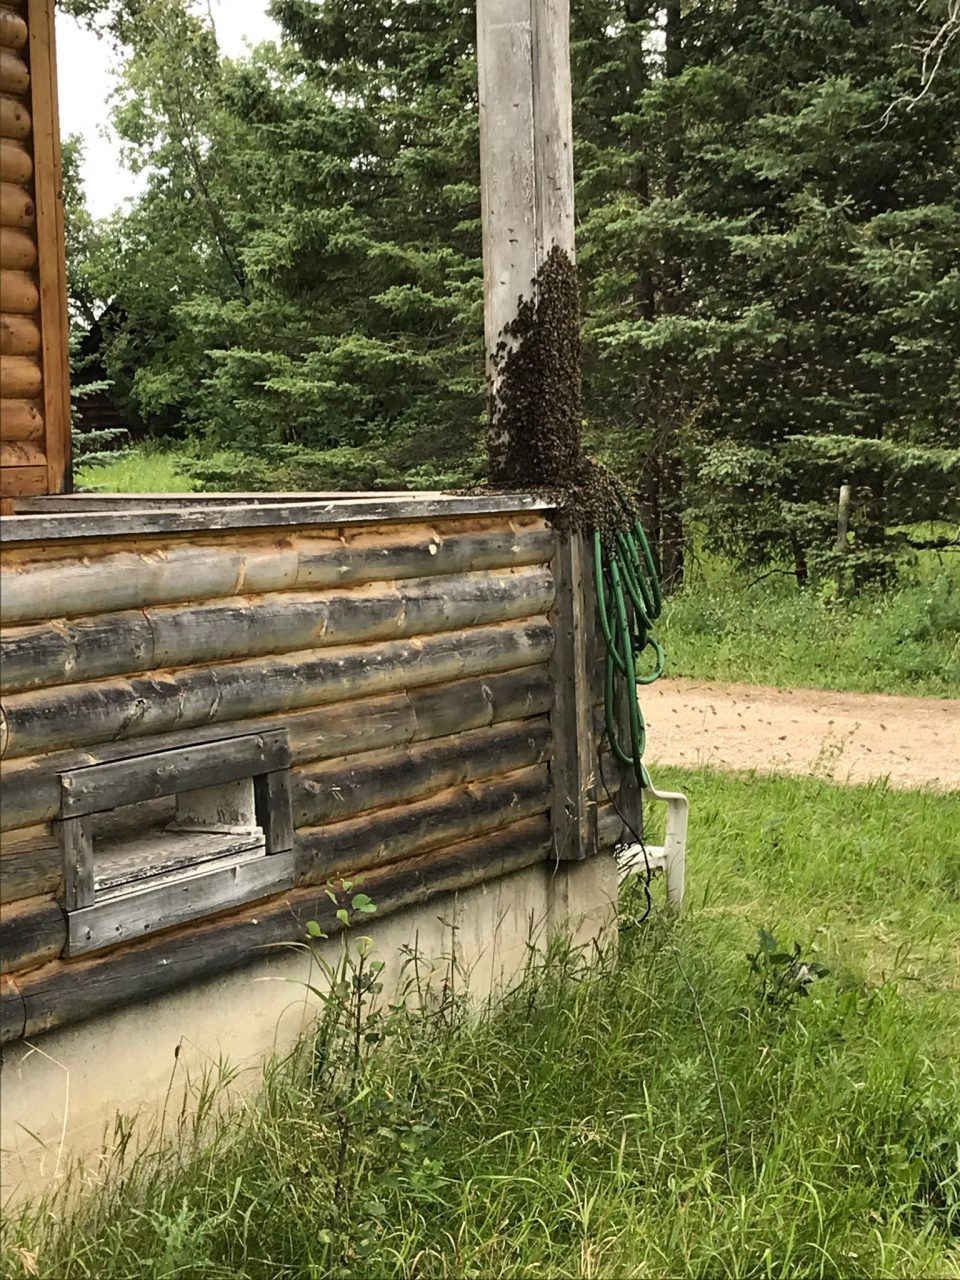 bees gathered on a house